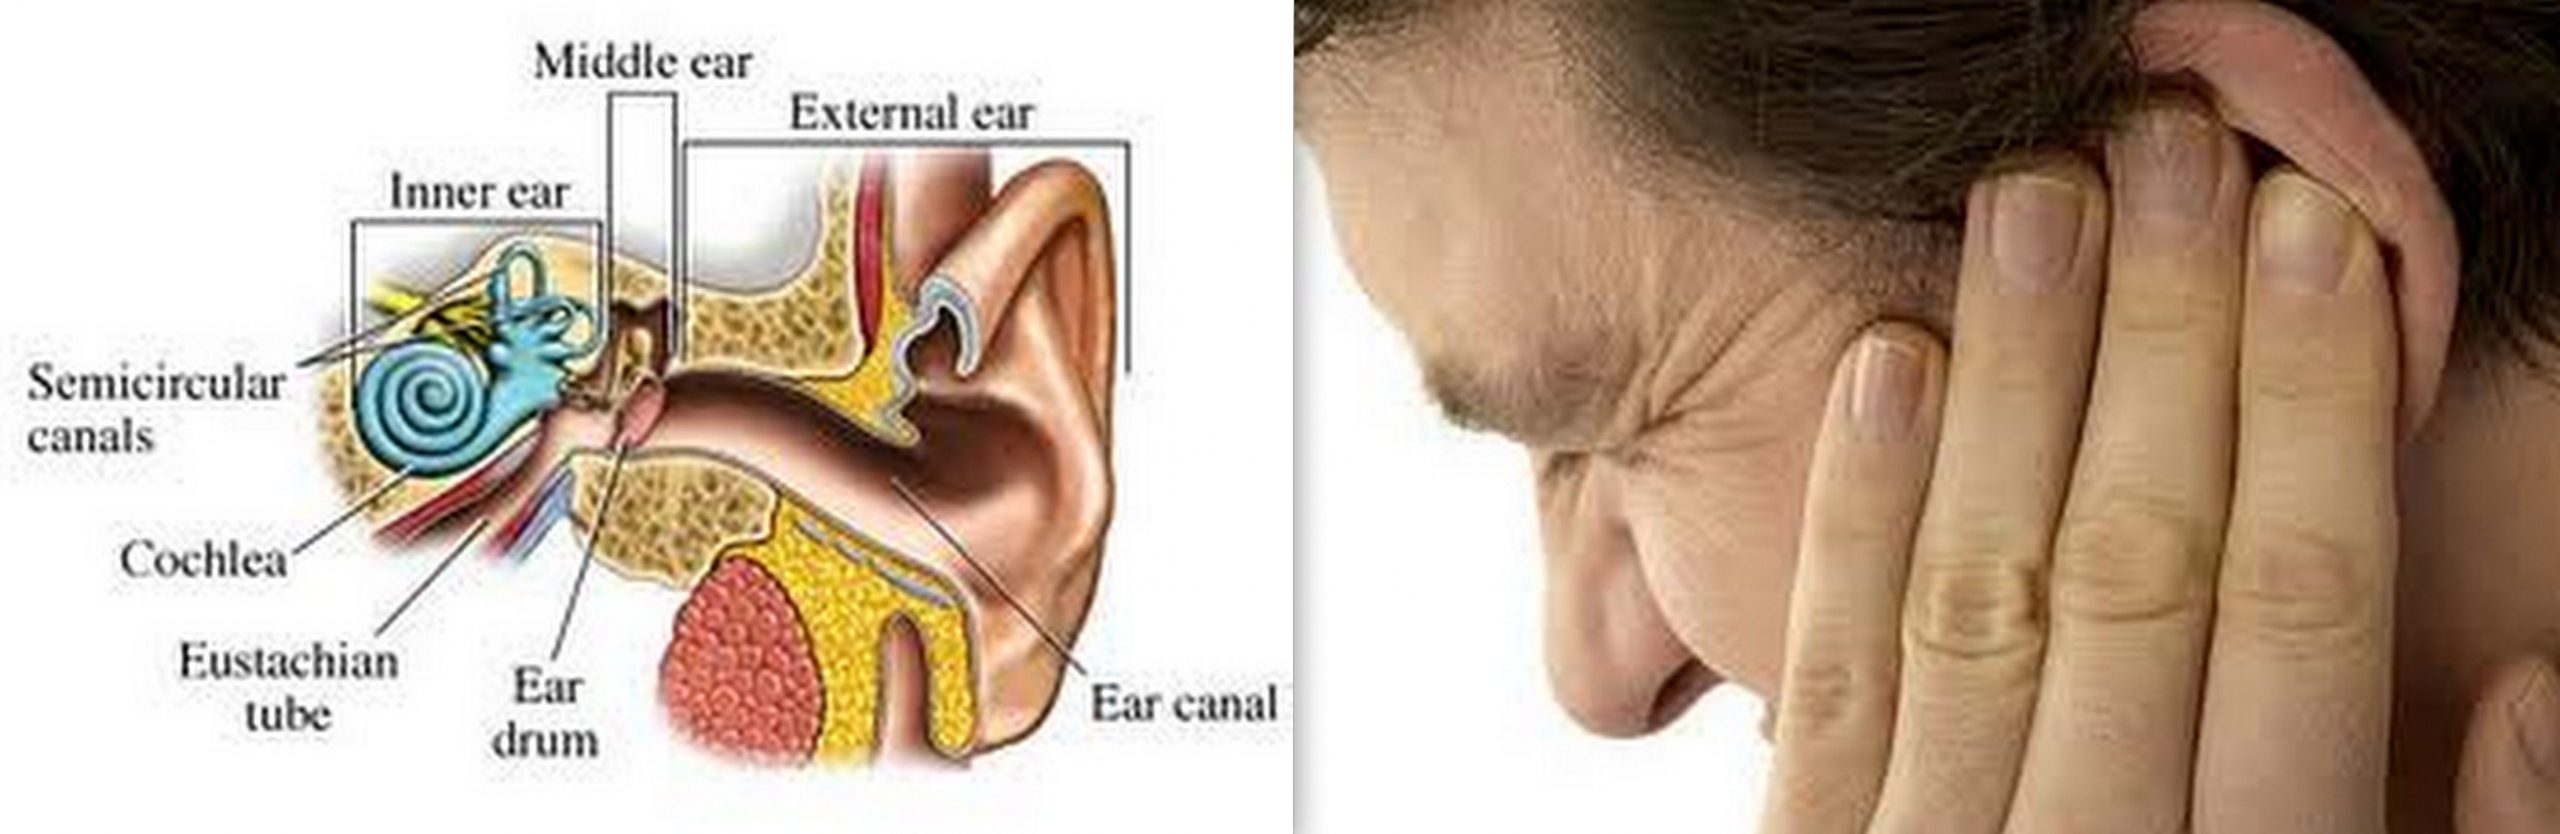 How can tinnitus be prevented? Some types of tinnitus may ...